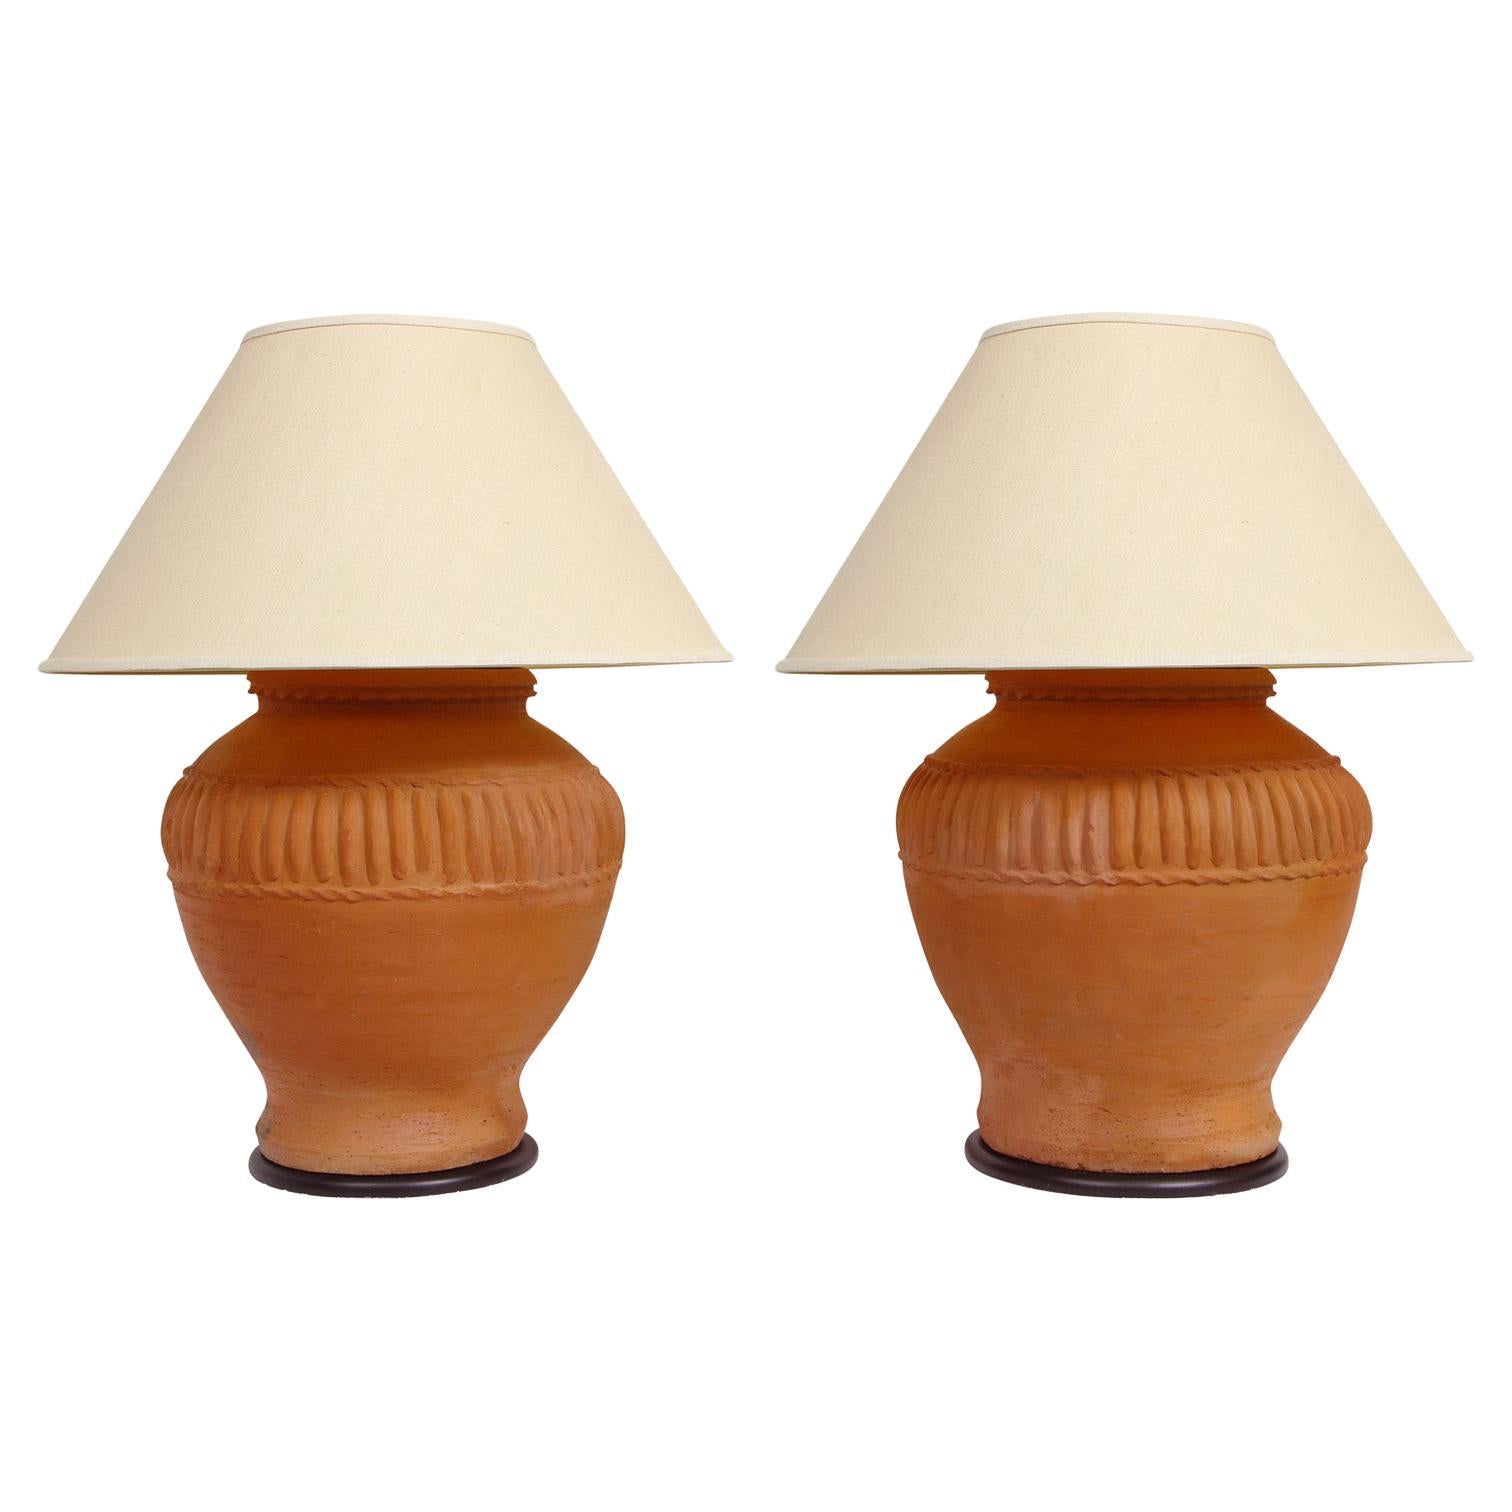 Pair of Large Artisan Terracotta Table Lamps, 1970s